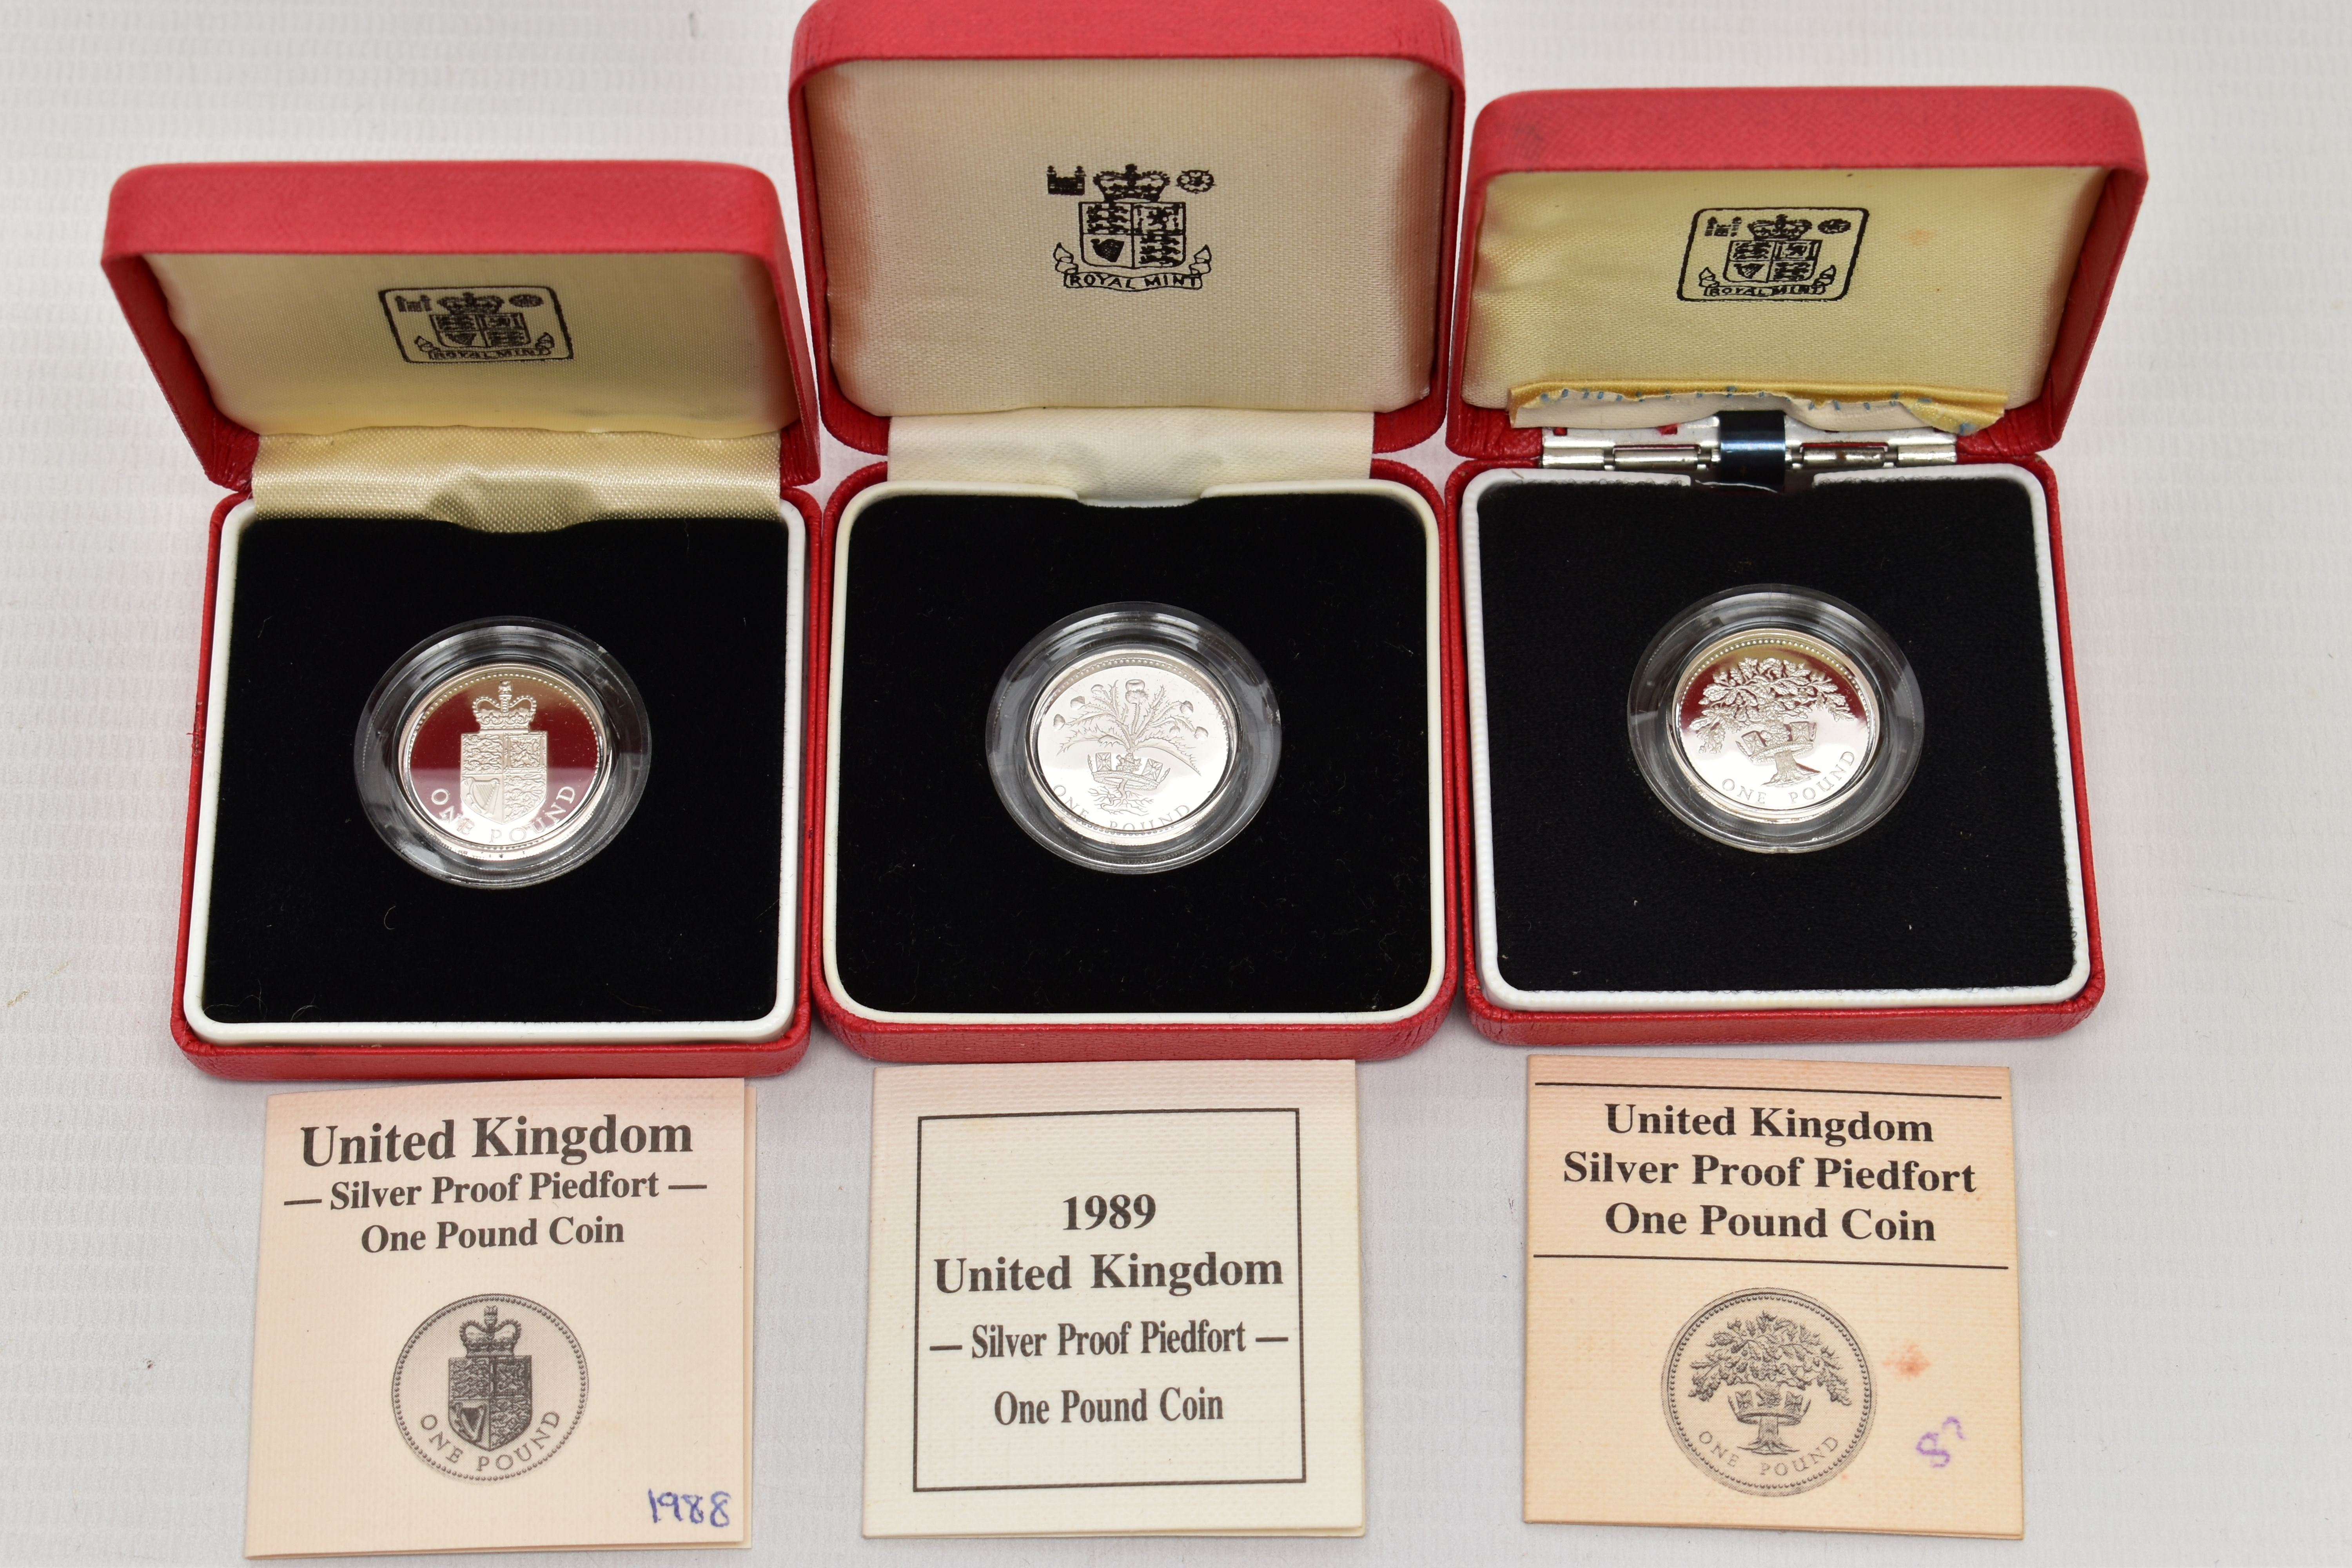 ROYAL MINT PIEDFORT SILVER PROOF ONE POUND BOXED COINS, 1987, 1988, 1989, all contain certificates